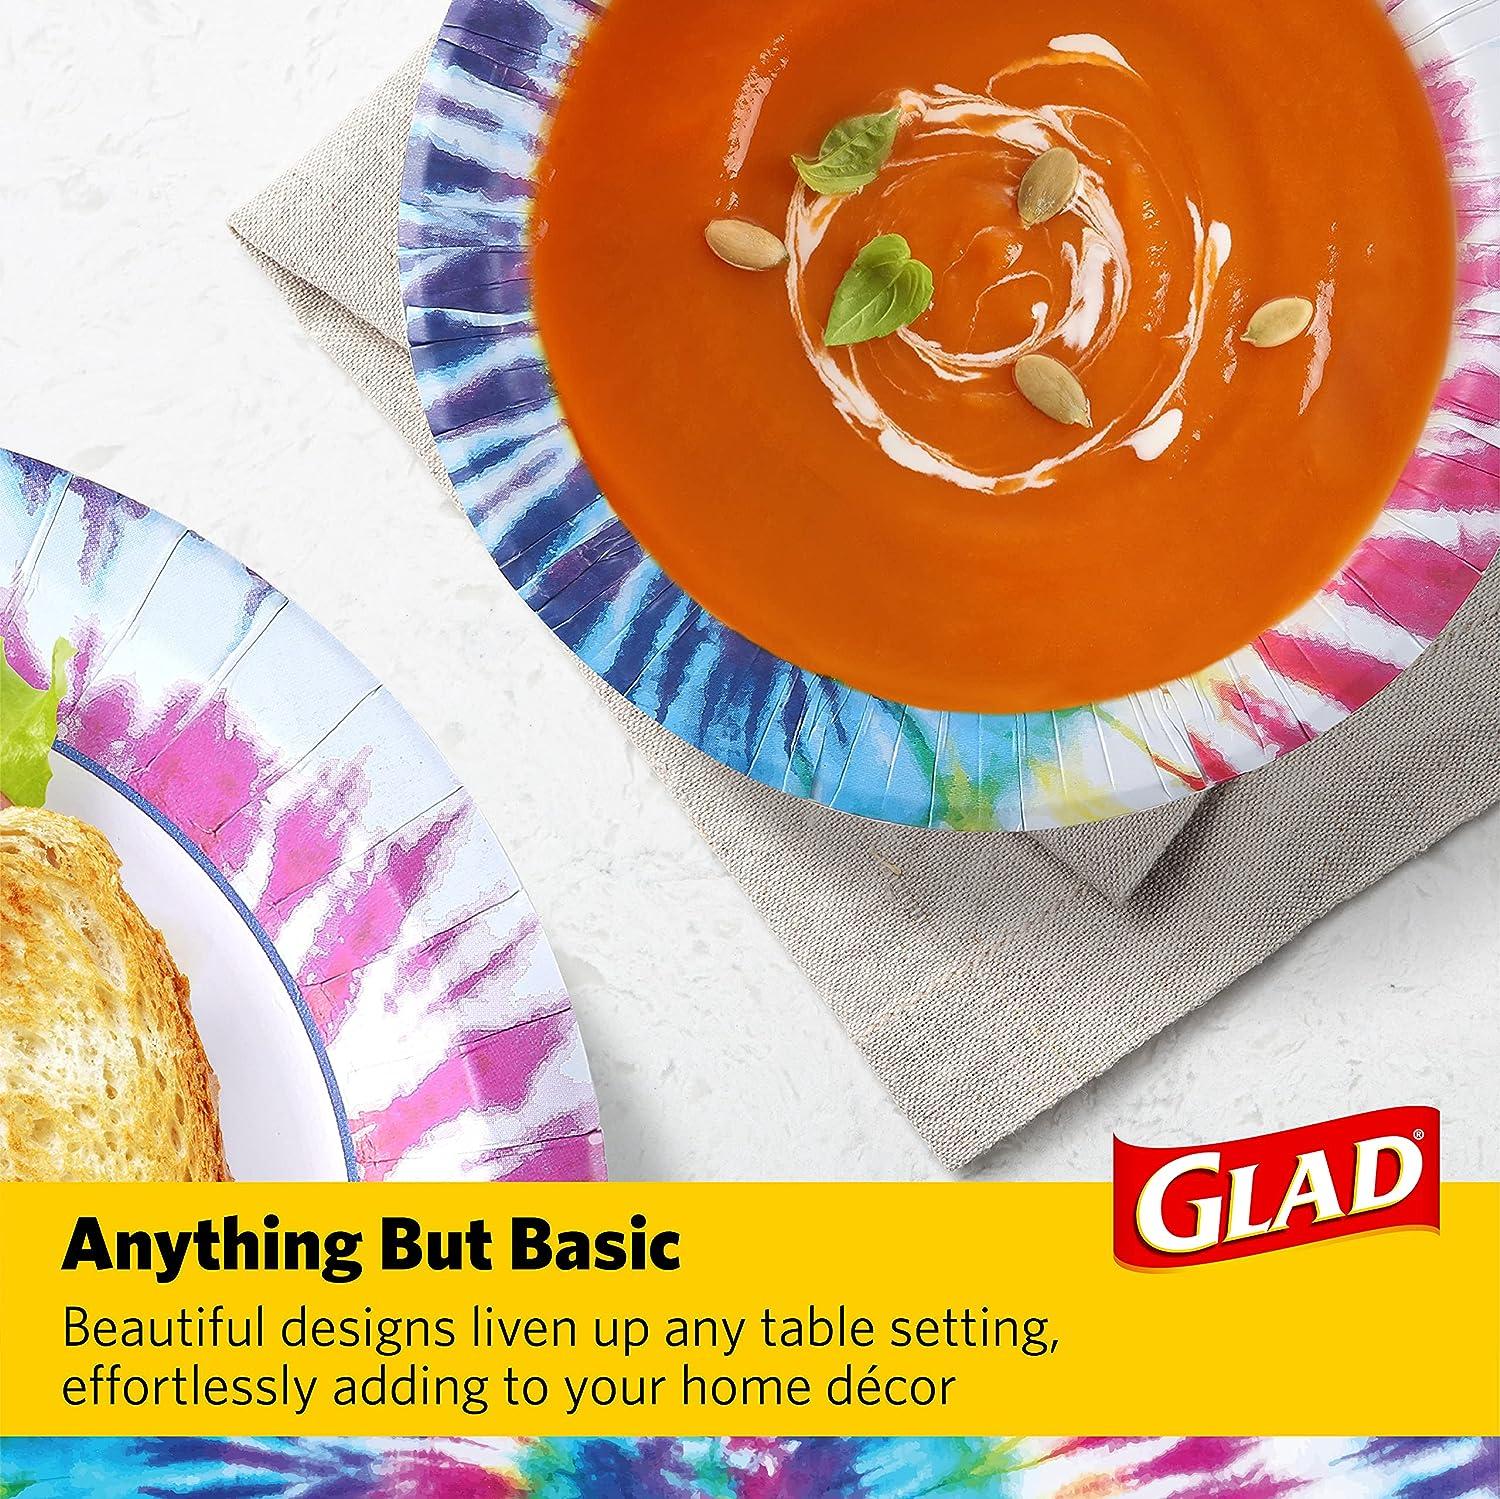 Glad Everyday Round Disposable 10 Paper Plates with Tie Dye Design, Heavy  Duty Soak Proof, Cut-Resistant, Microwavable Paper Plates for All Foods &  Daily Use